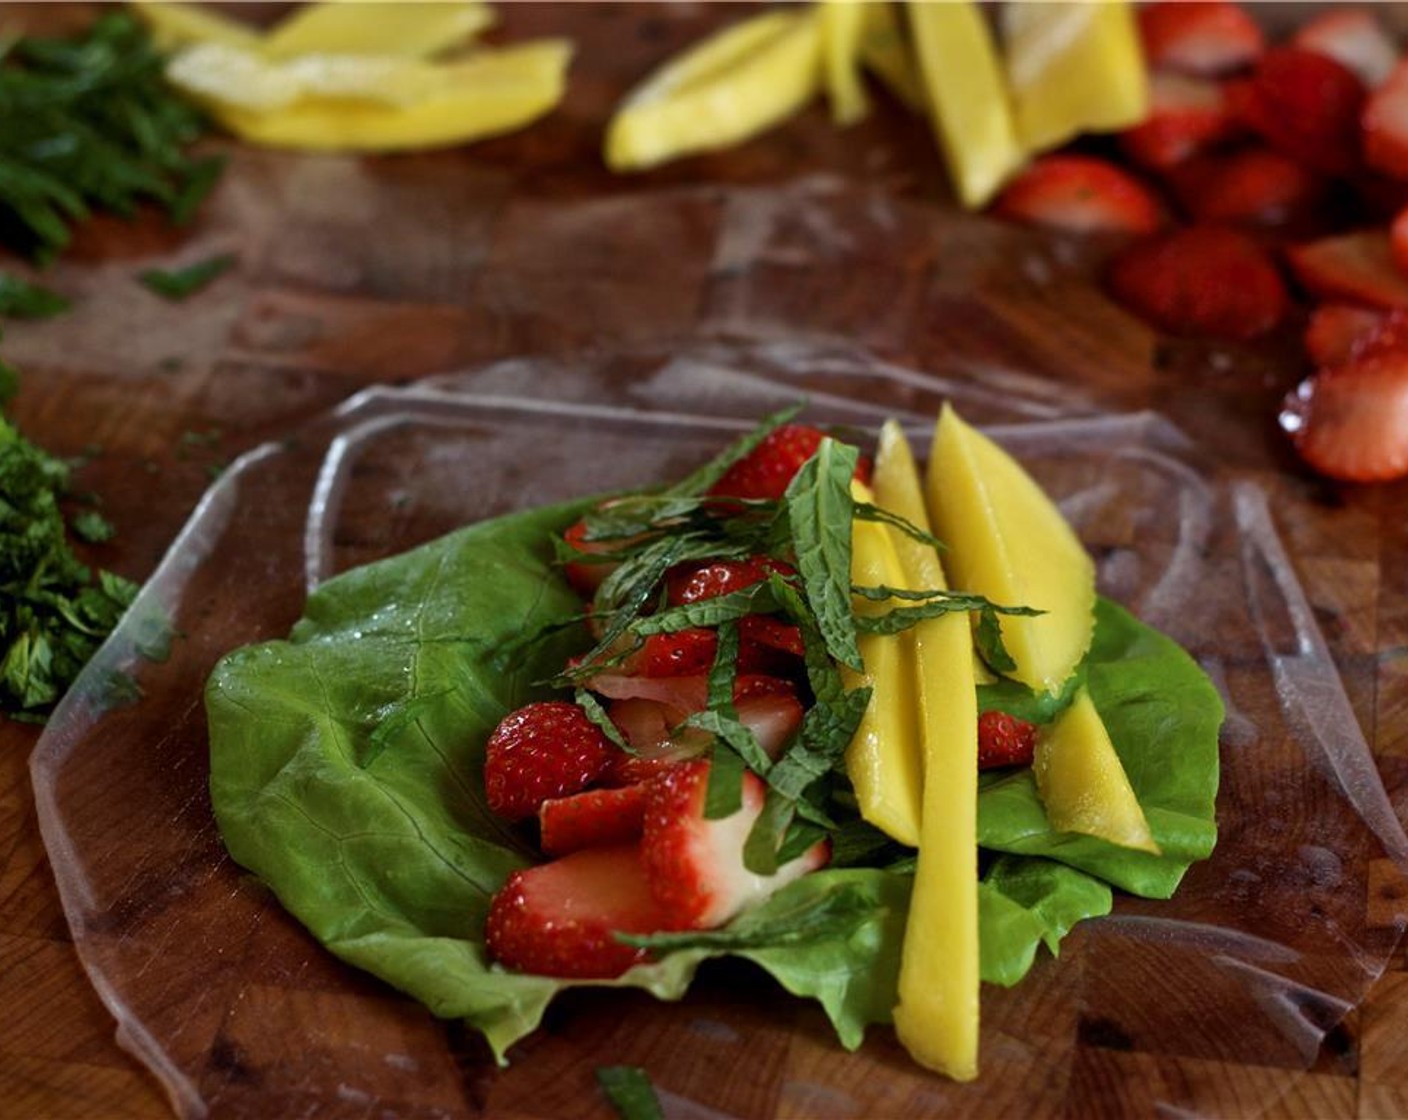 step 4 Lay one piece of the Boston Lettuce (8 pieces) on rice paper wrapper; layer one-eighth each of the strawberries, mango, and sliced fresh mint leaves.